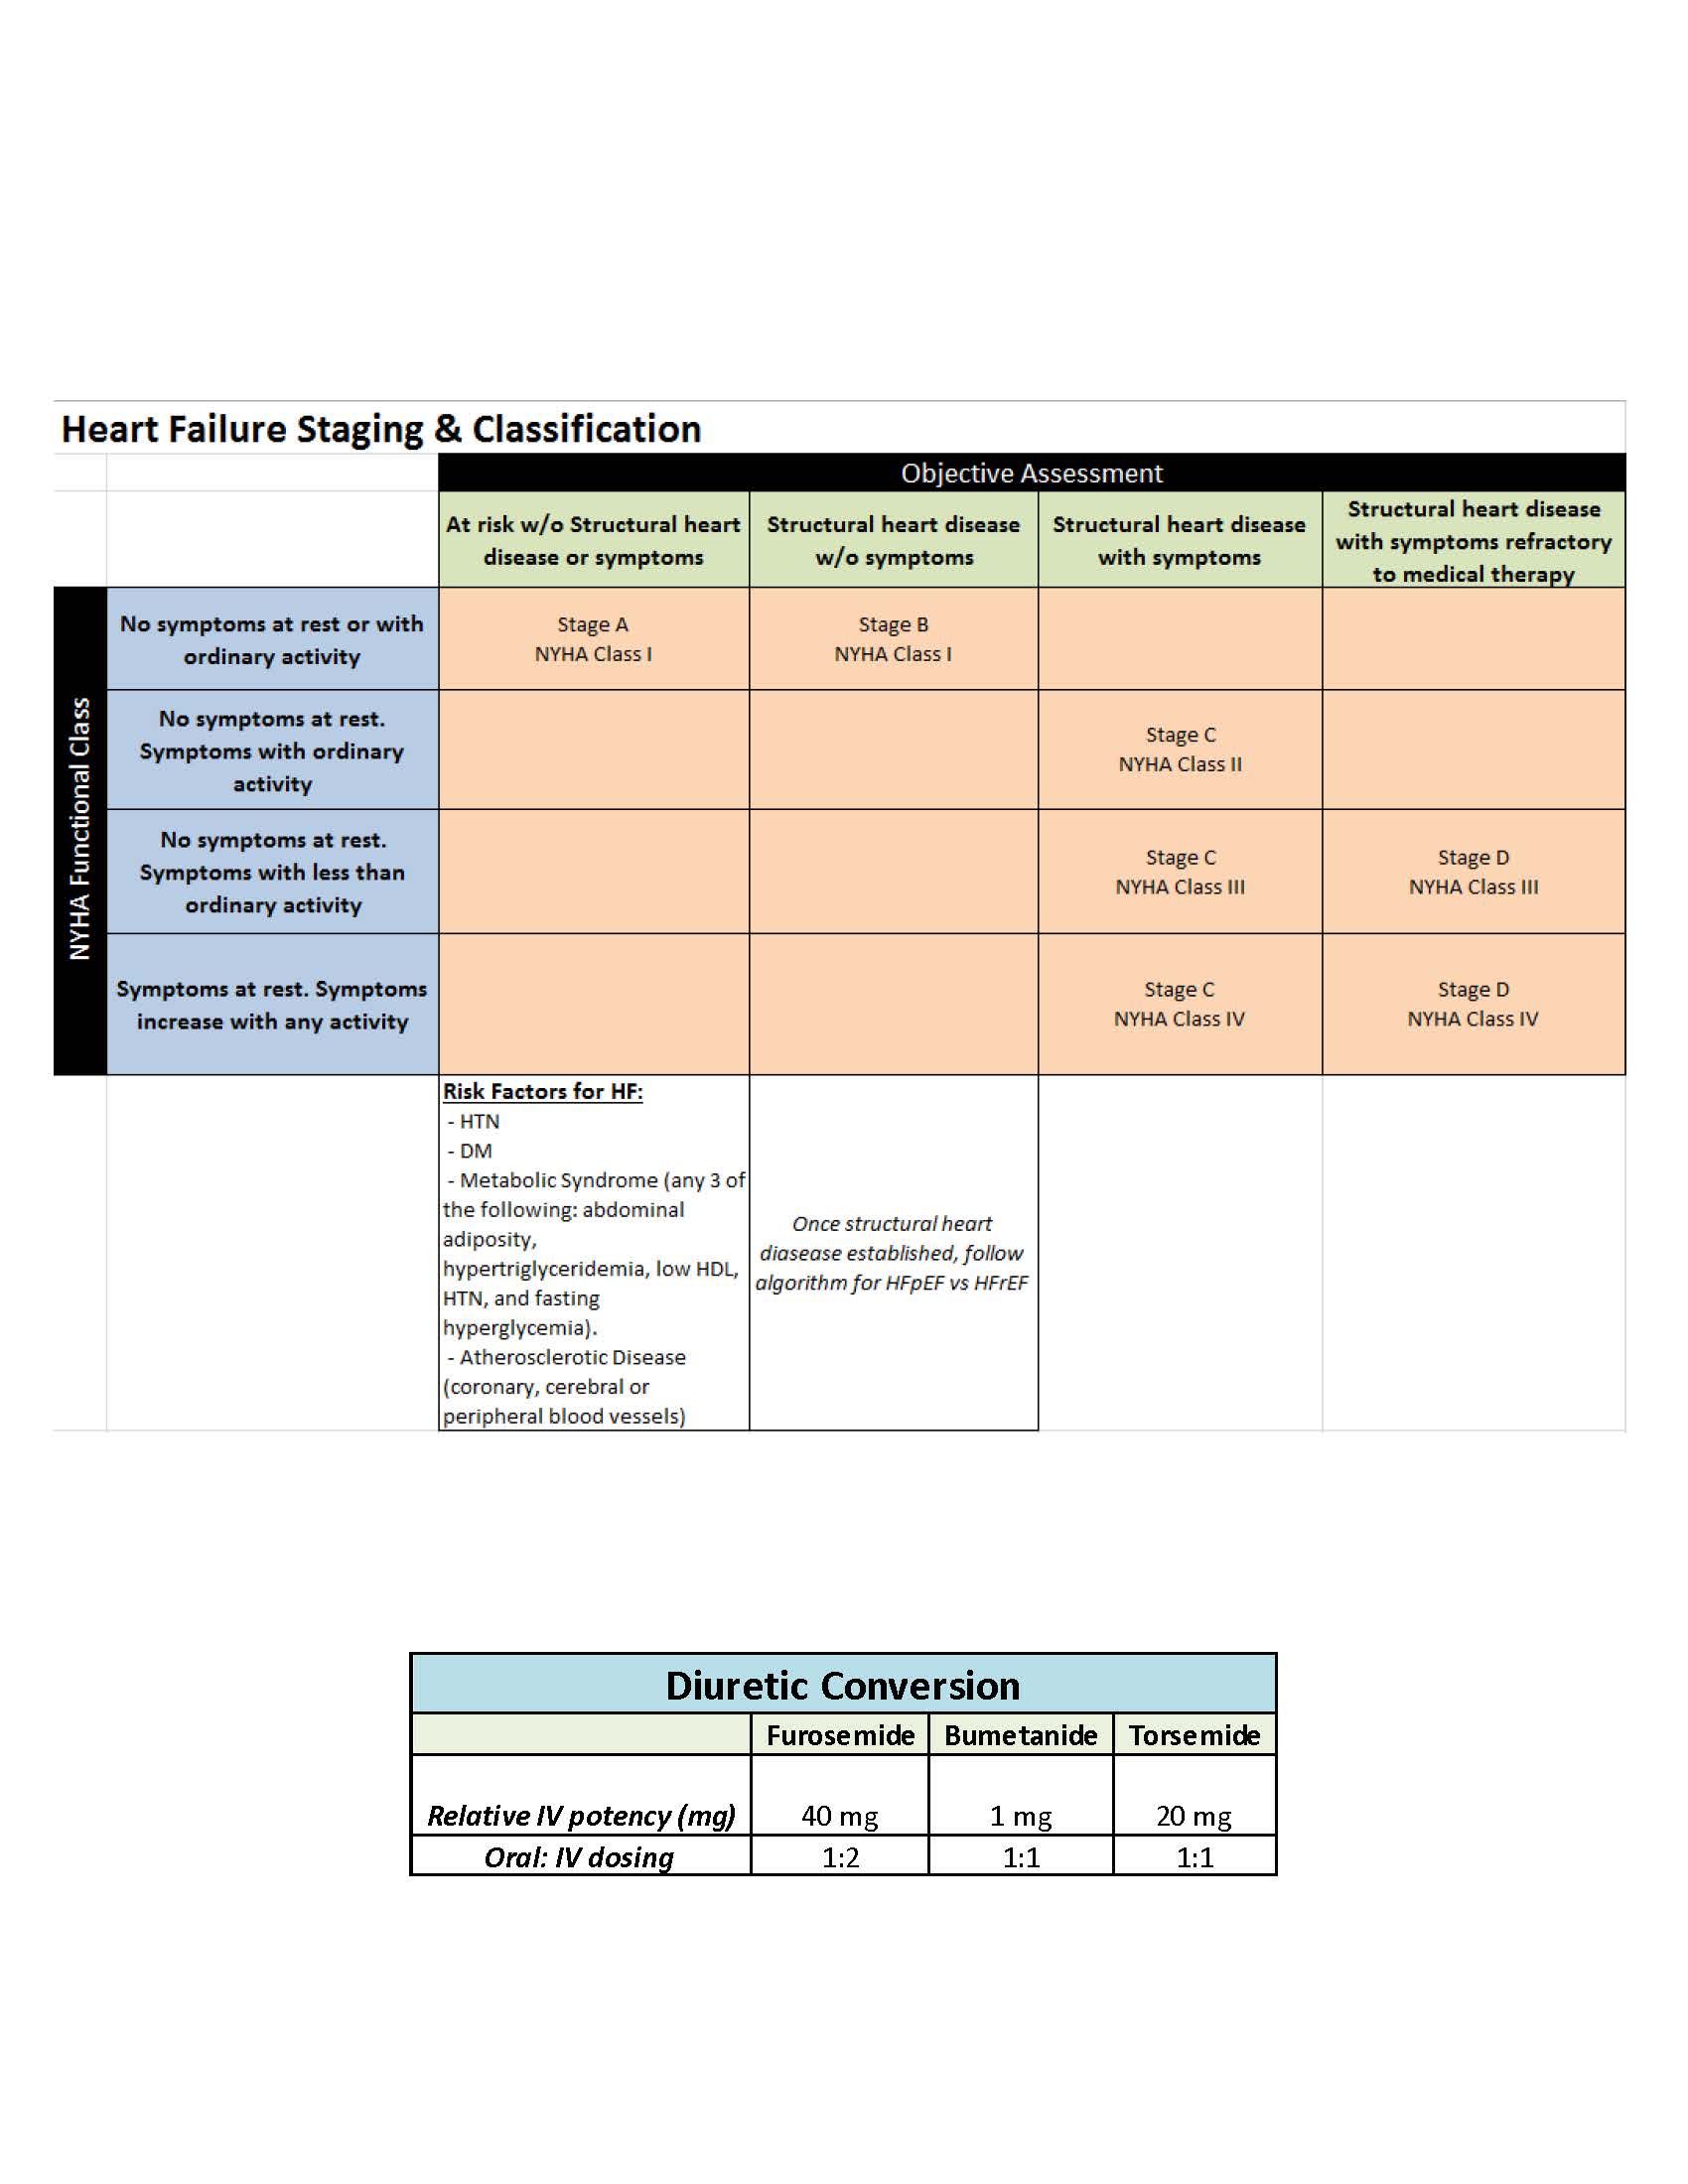 Clinical Guidelines Document Image 6